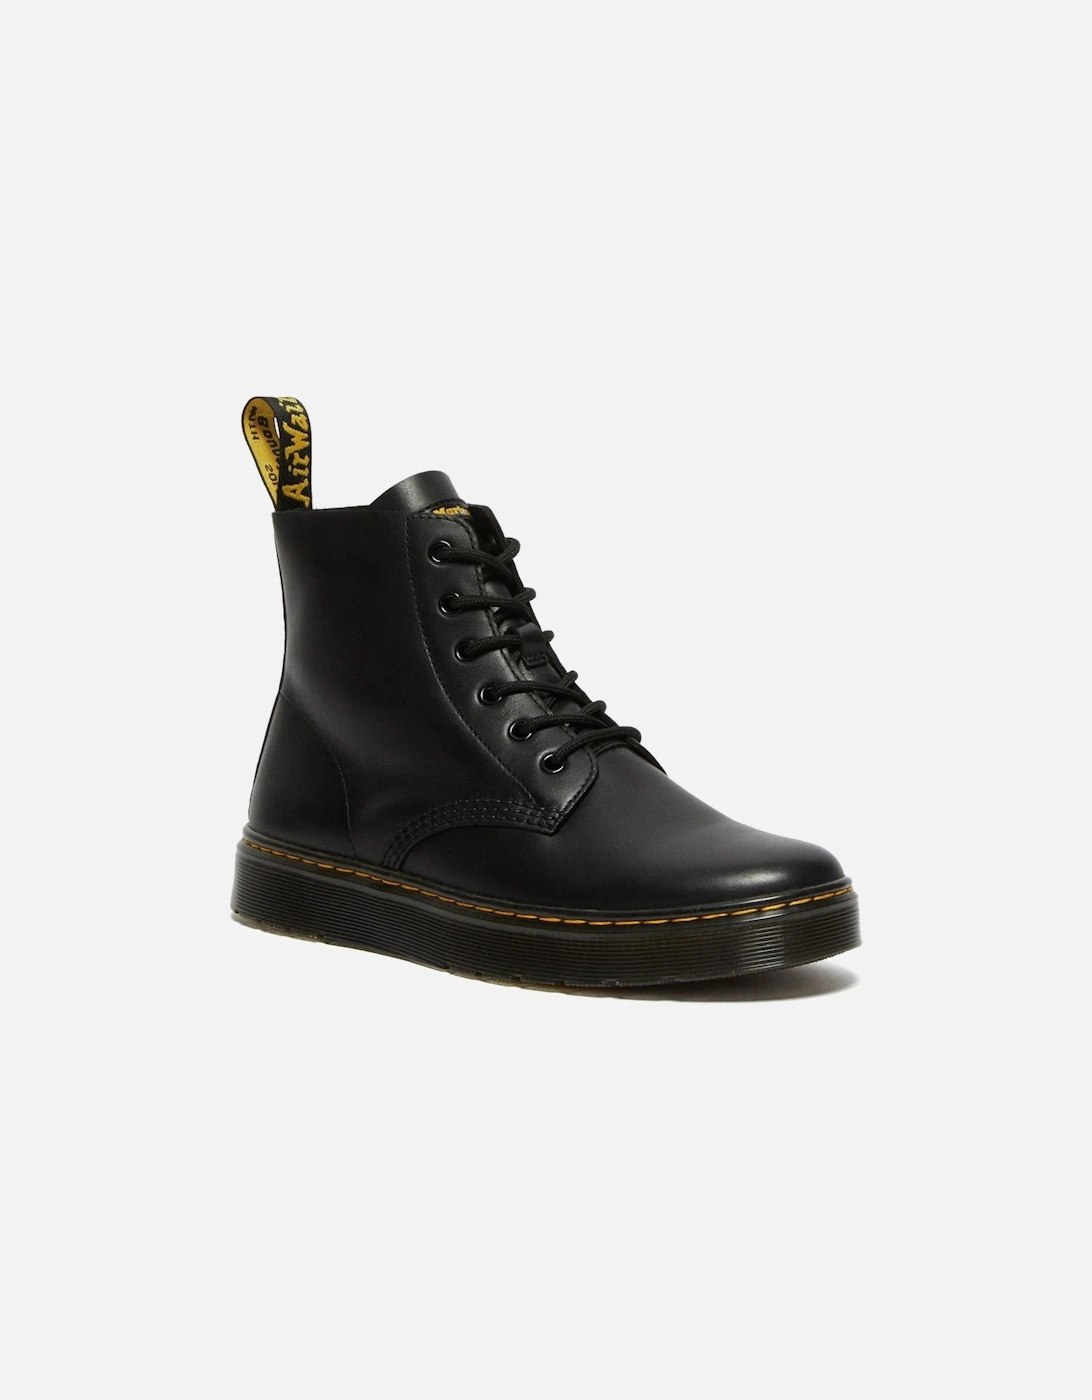 Dr. Martens Mens Thurston Lusso Leather Chukka Boots (Black)